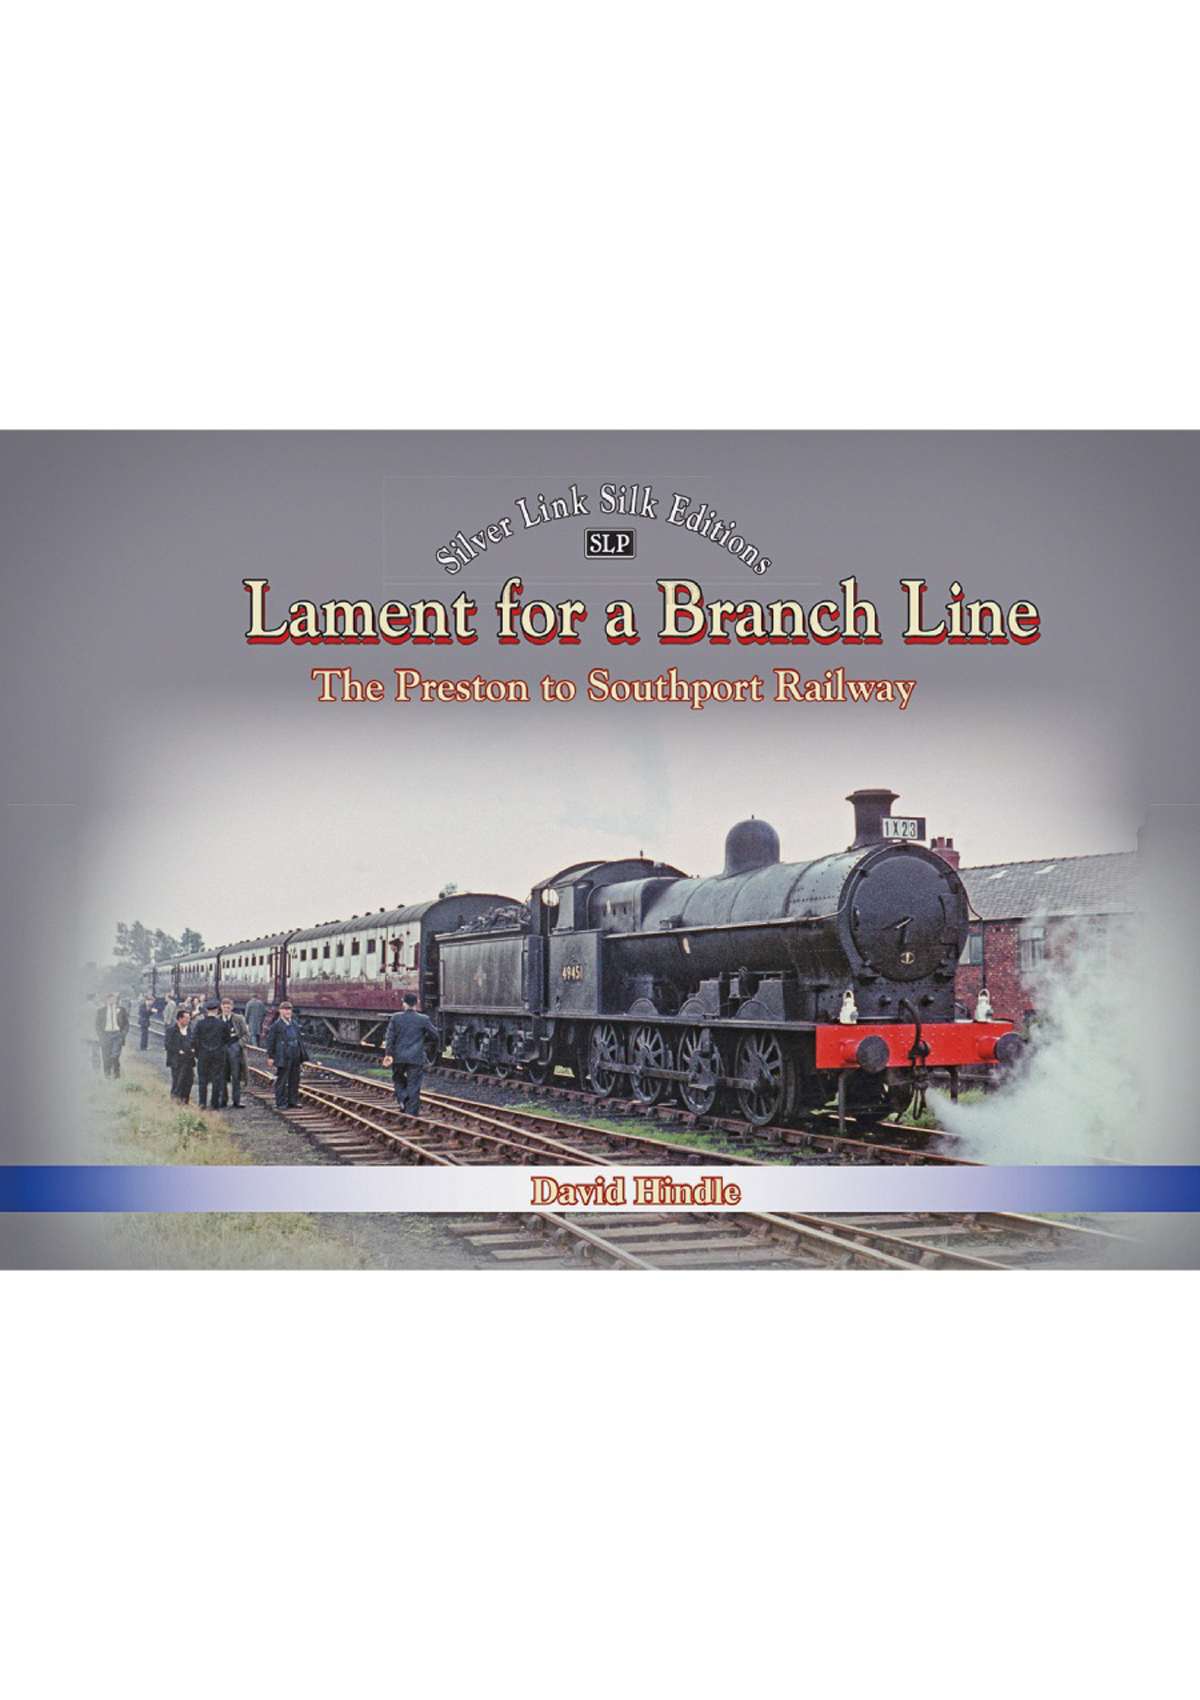 5959 - Lament for a Branch Line